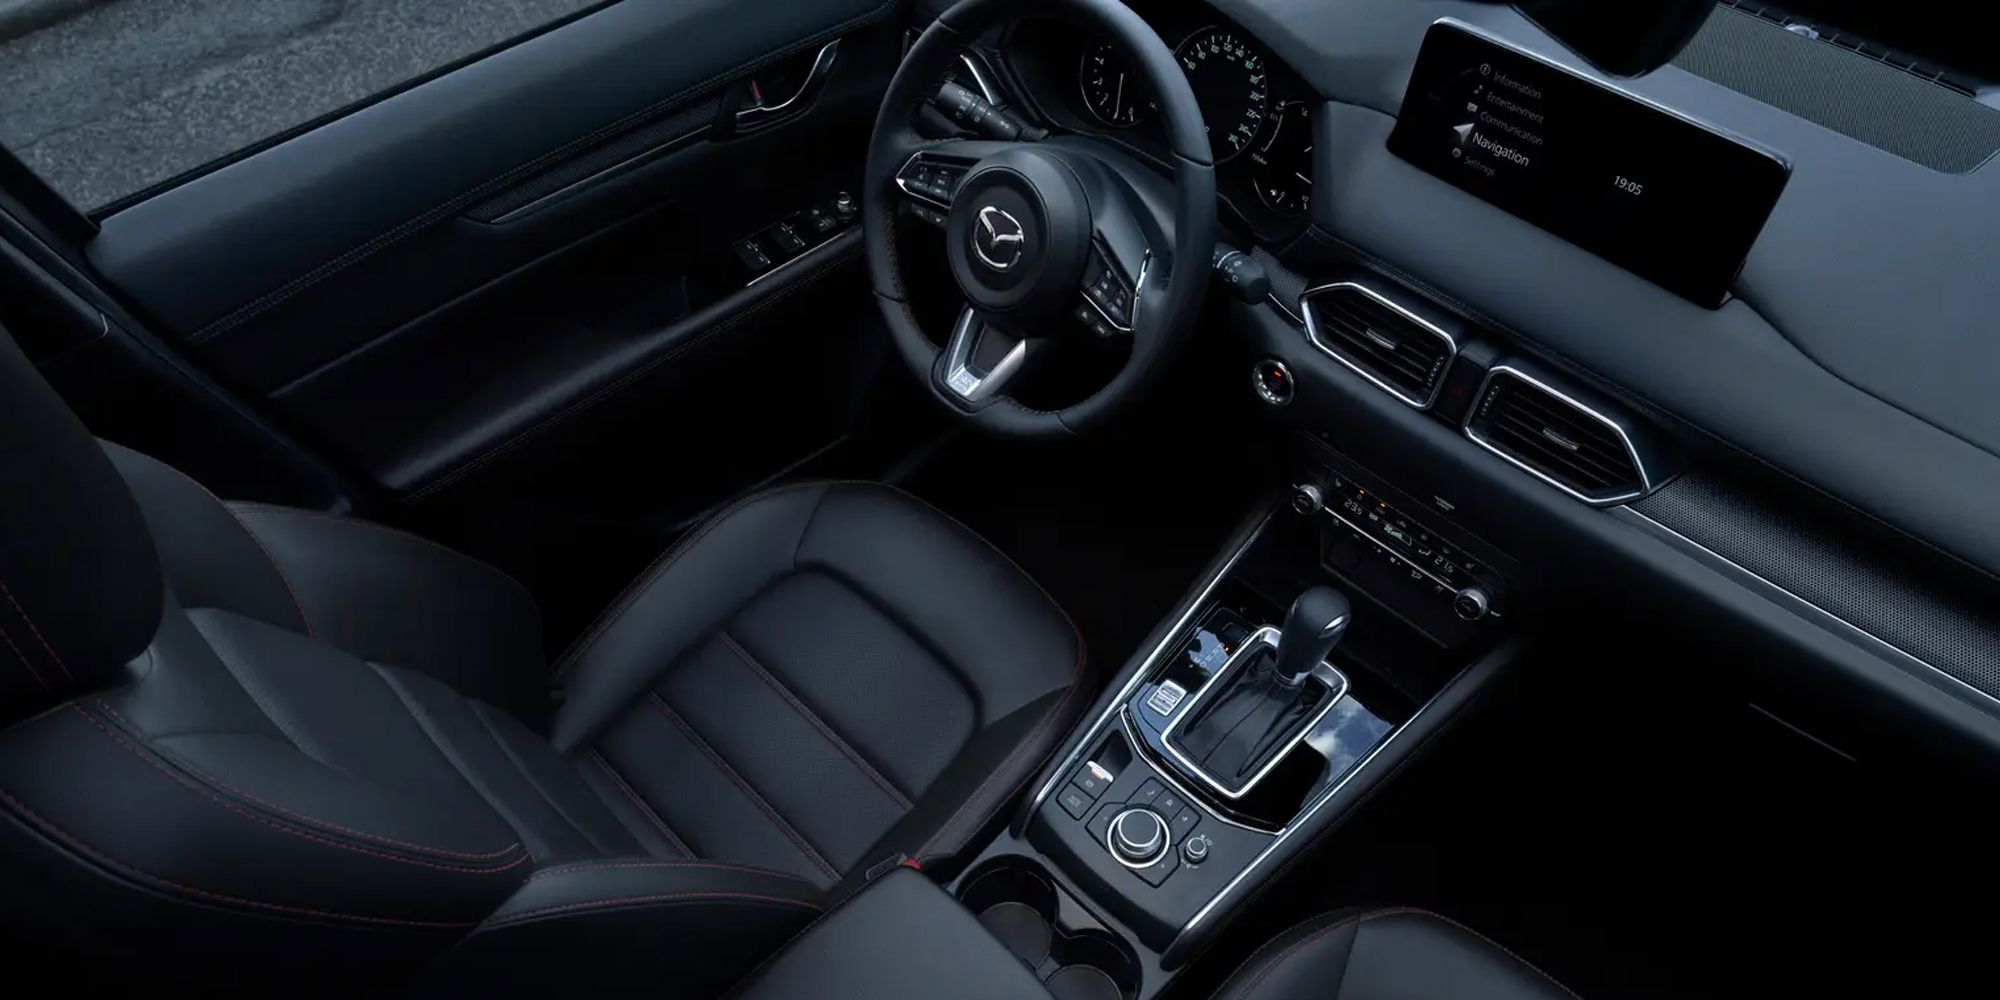 Top view of the new CX-5's interior